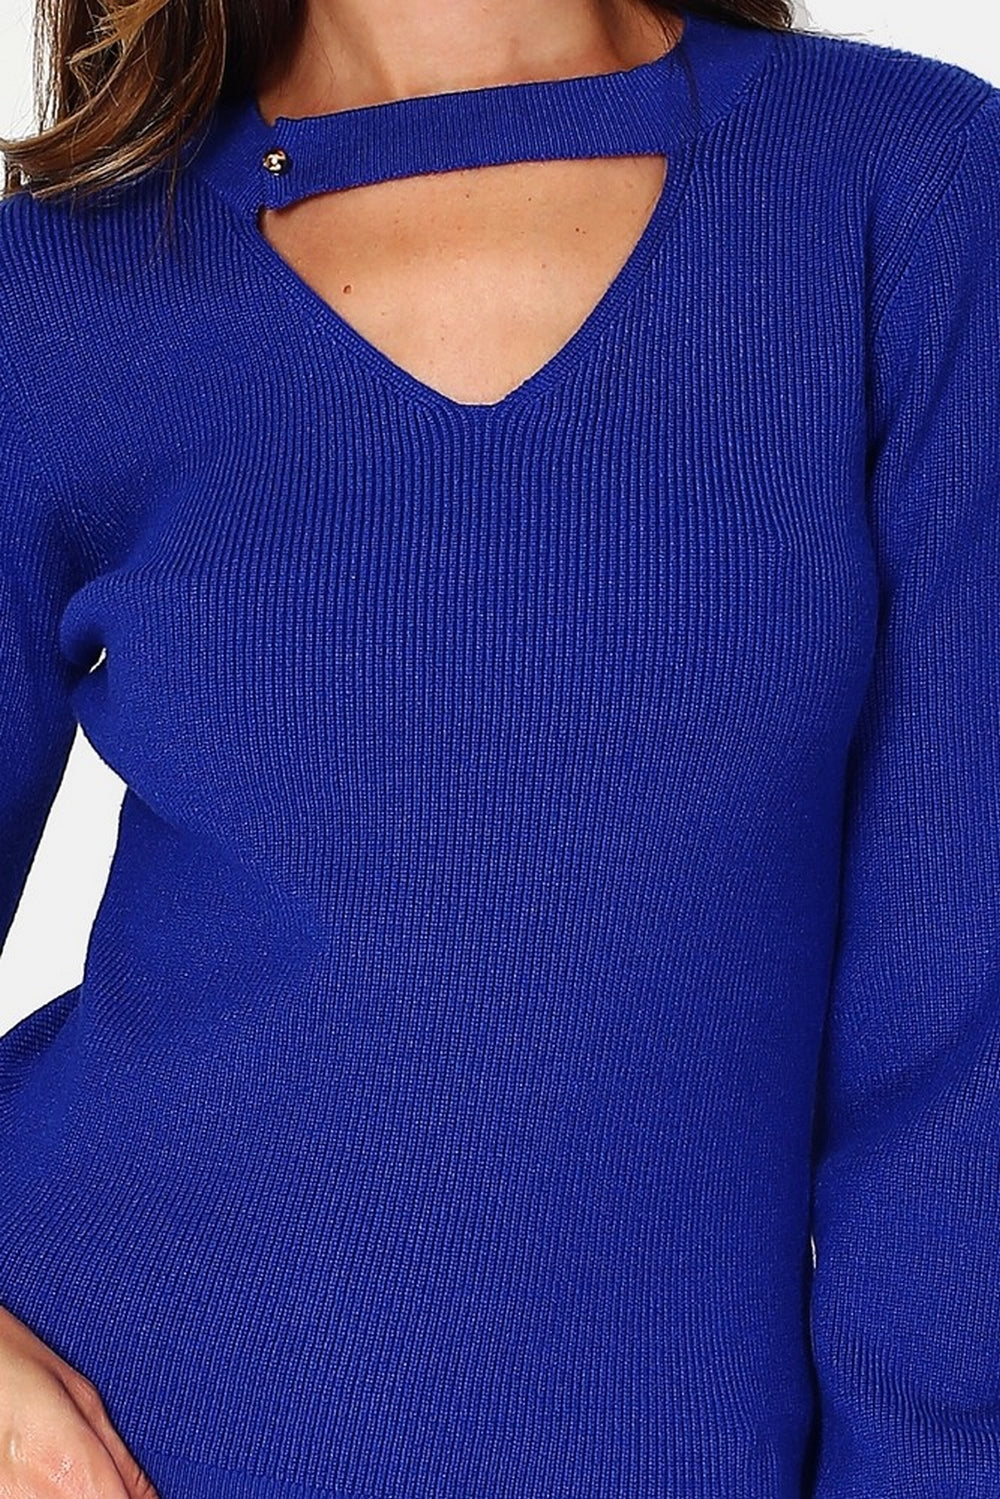 V-neck sweater, closed by a pearl button placket with long sleeves